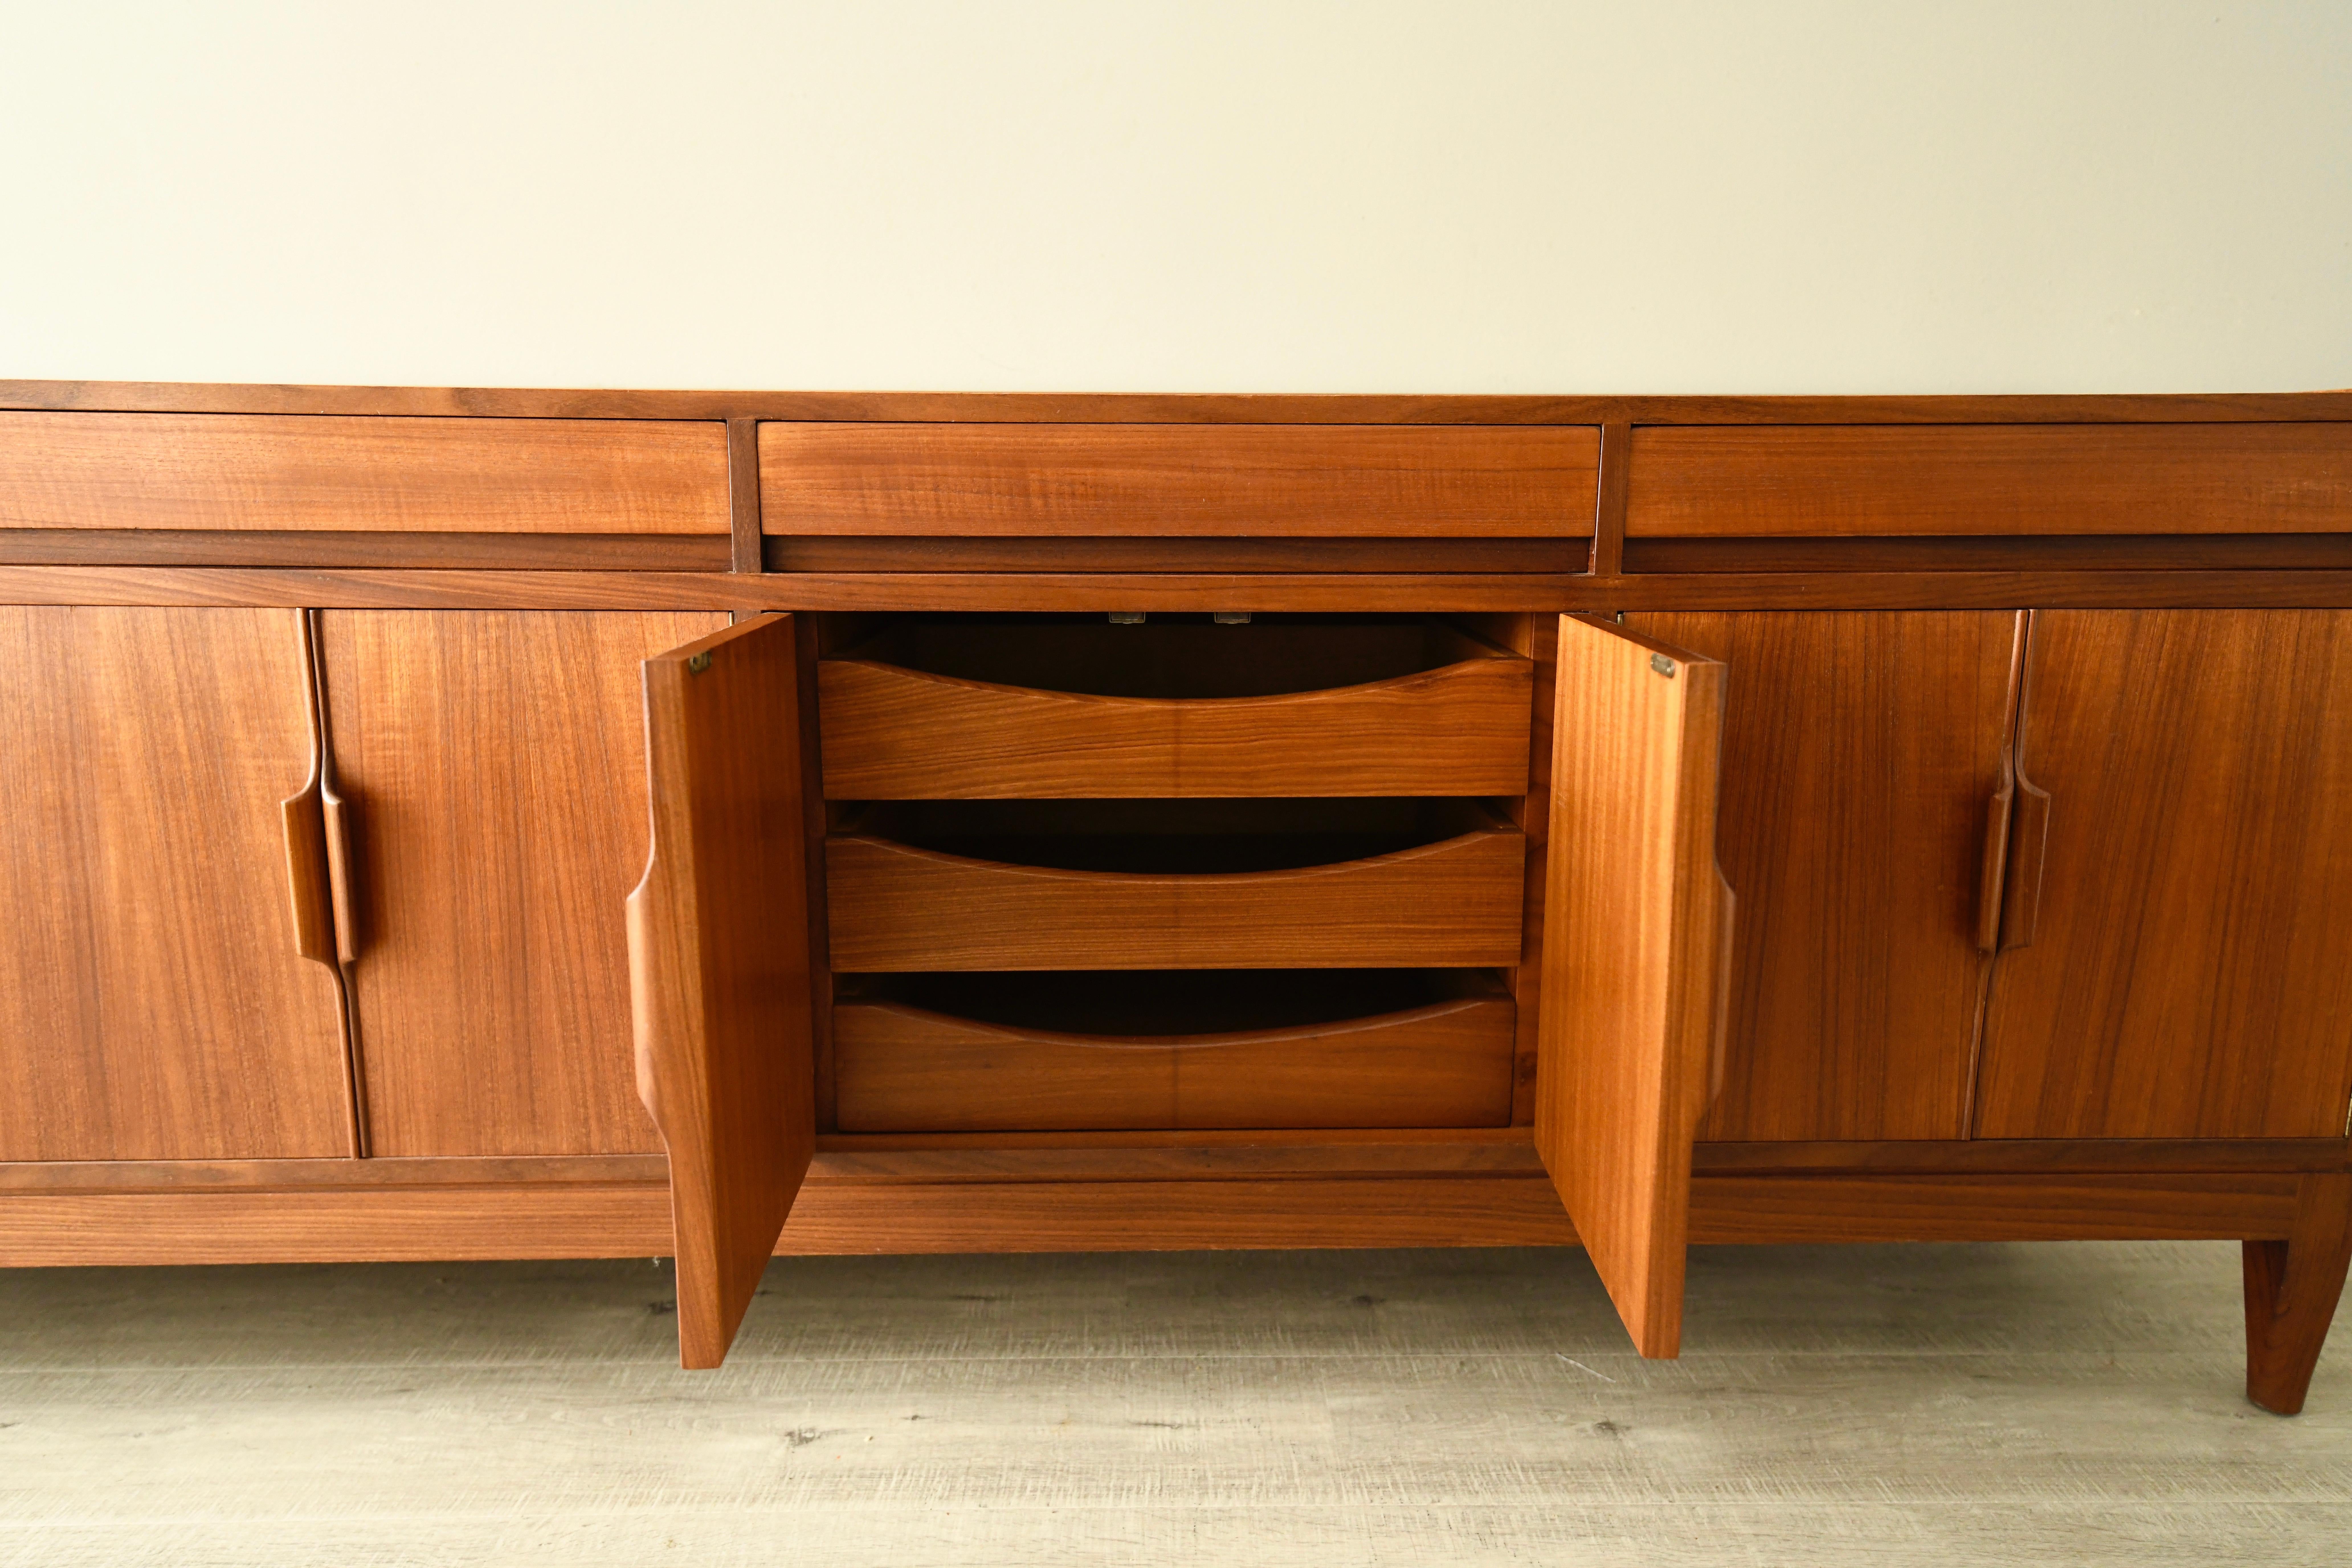 Description

Teak sideboard boasts a Classic midcentury design by Robert Heritage for Archie Shine. Manufactured in the UK around 1960, this piece is still in excellent condition and eager to smarten up a hallway, entrance way or main living